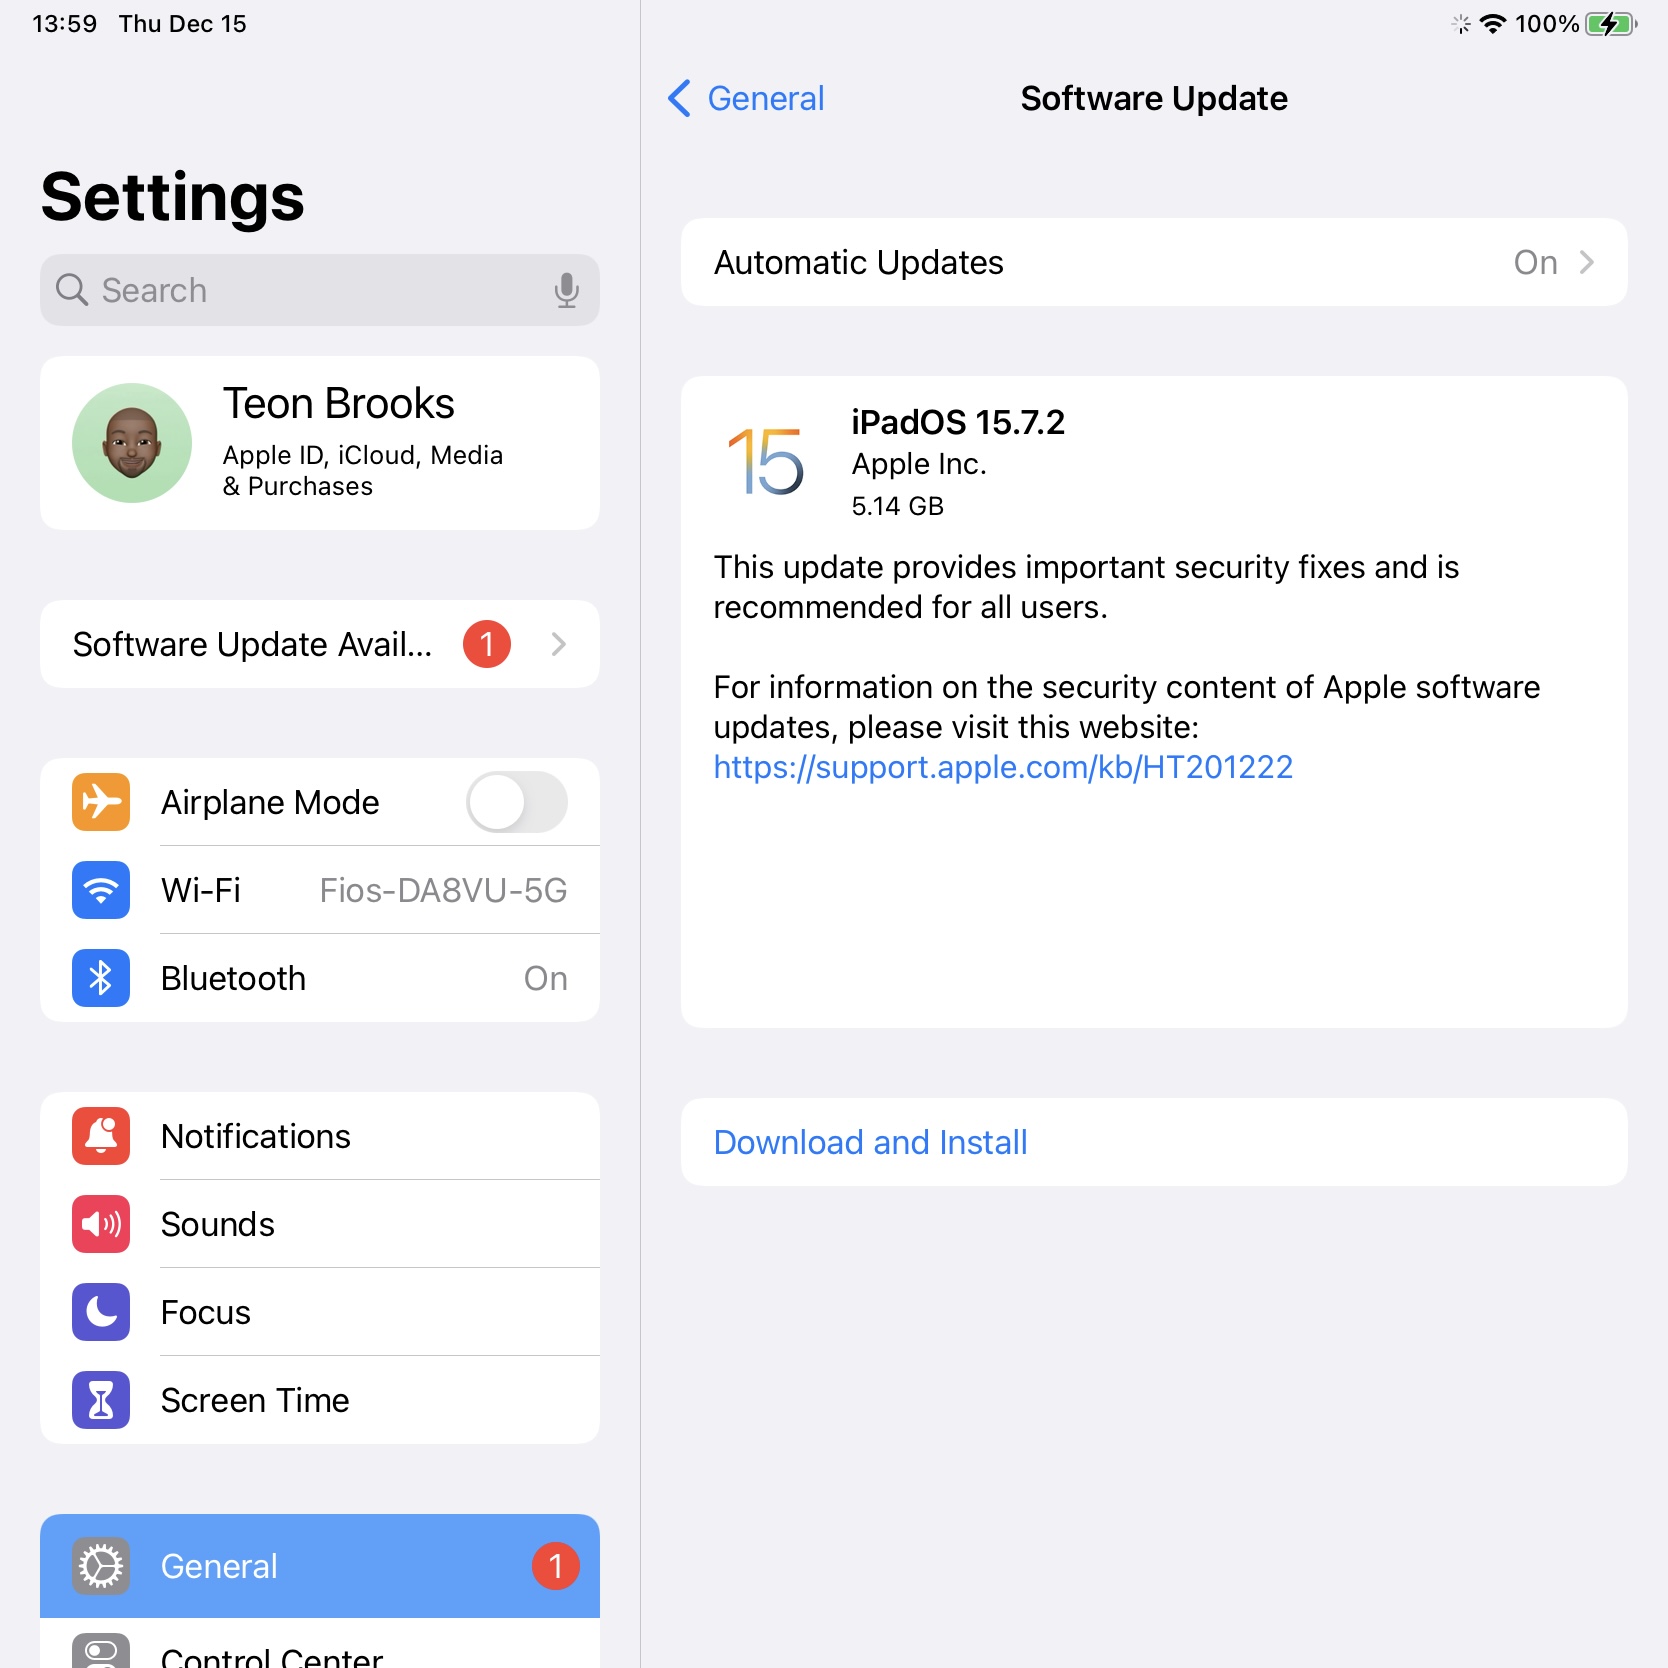 Settings screen only displaying iPadOS 15.7.2 as an upgrade option